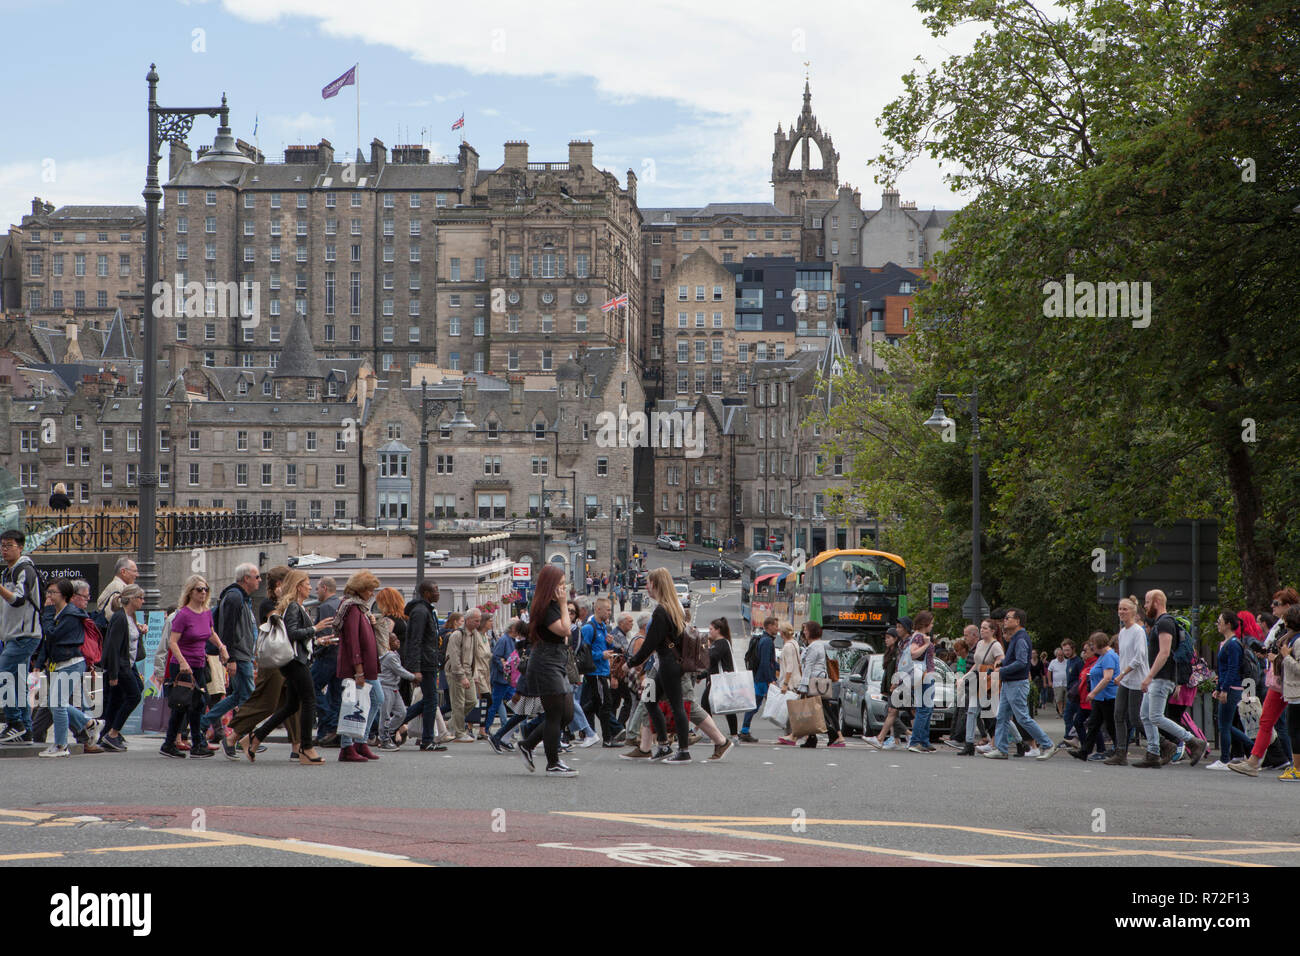 Princes Street in Edinburgh, Scotland, crowded with tourists and shoppers Stock Photo